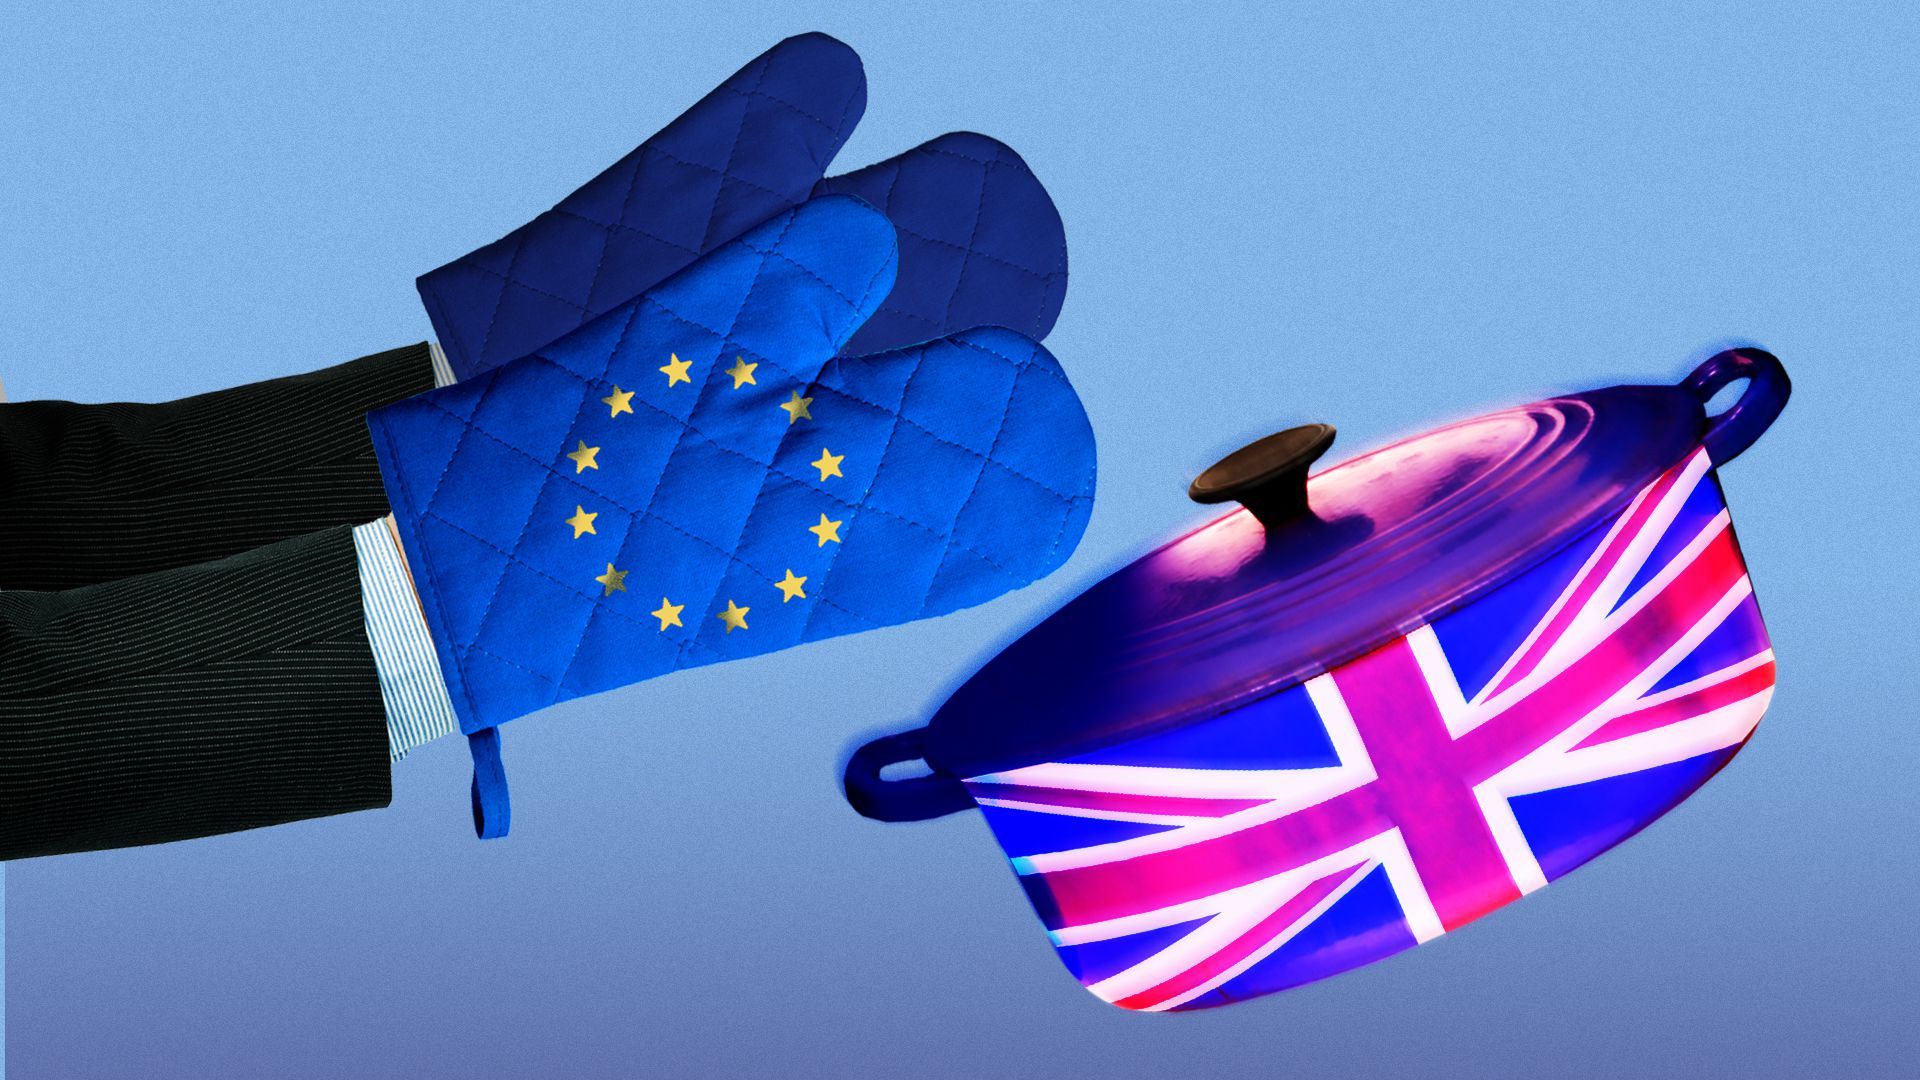 Illustration of oven mitts with EU flag symbol dropping an oven dish with U.K. flag